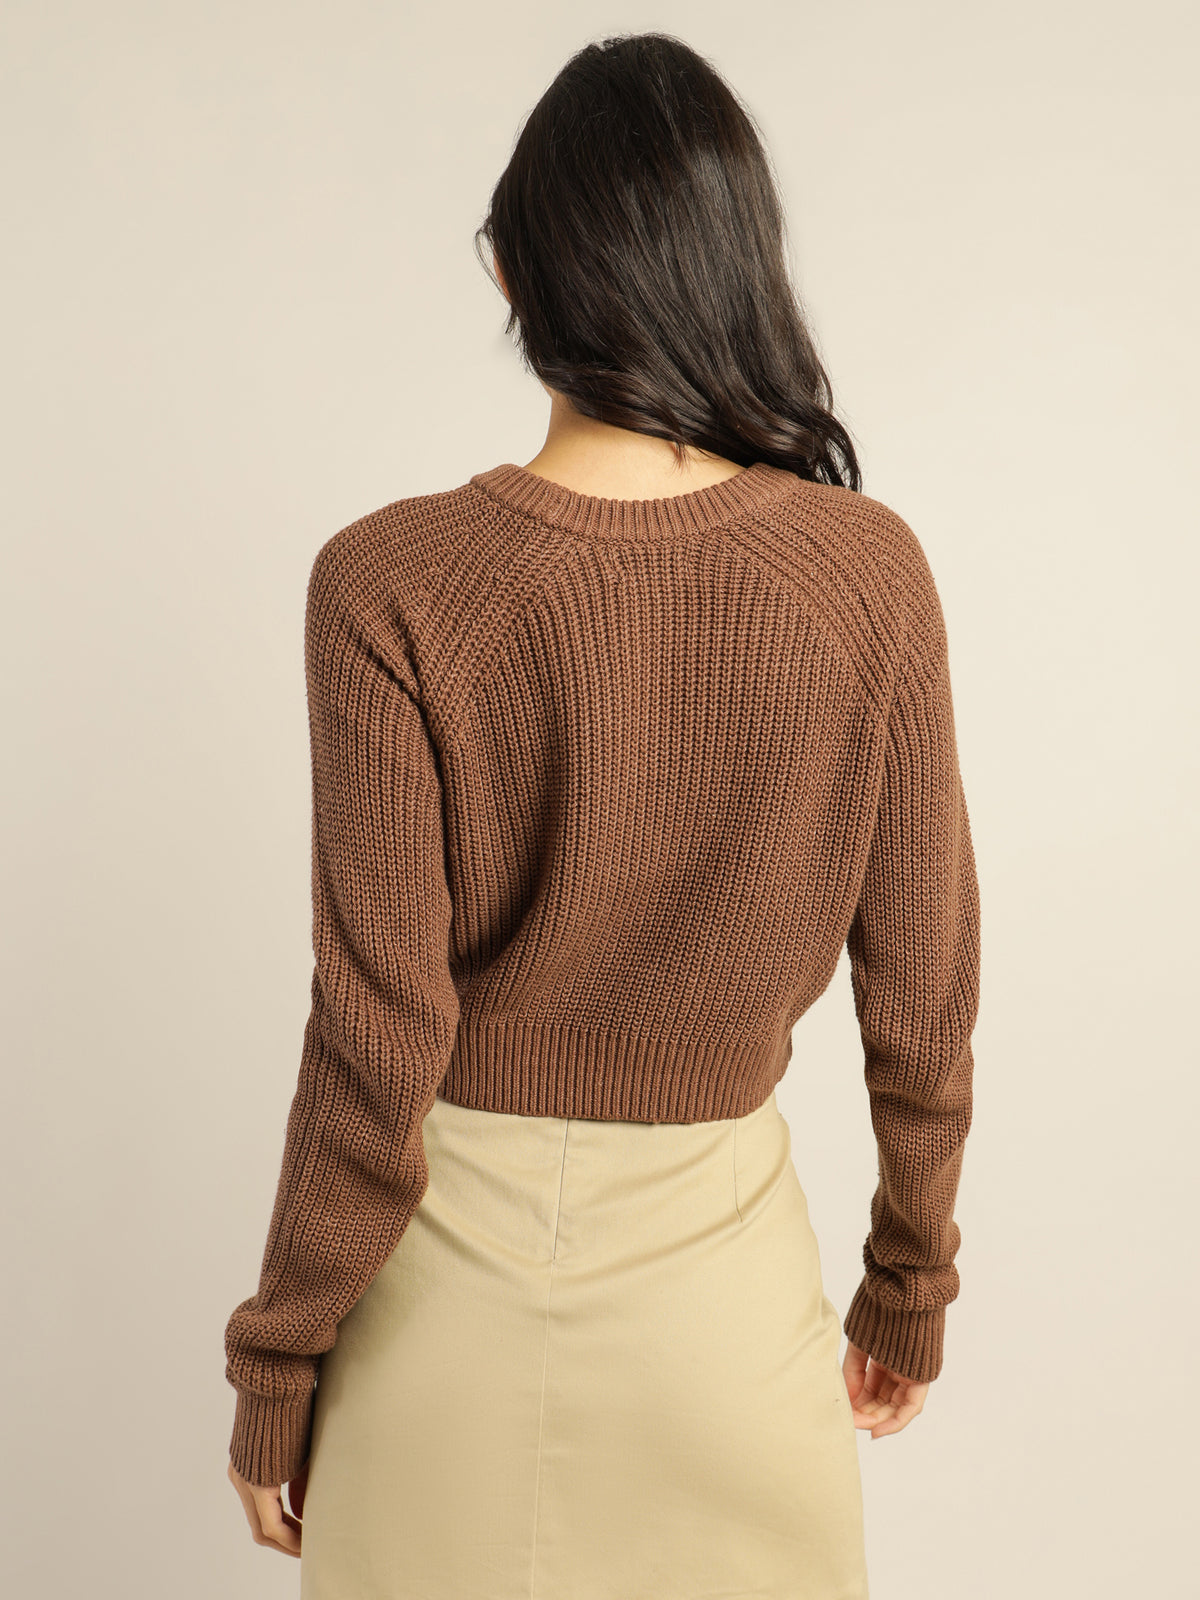 Rylee Crop Knit in Chocolate